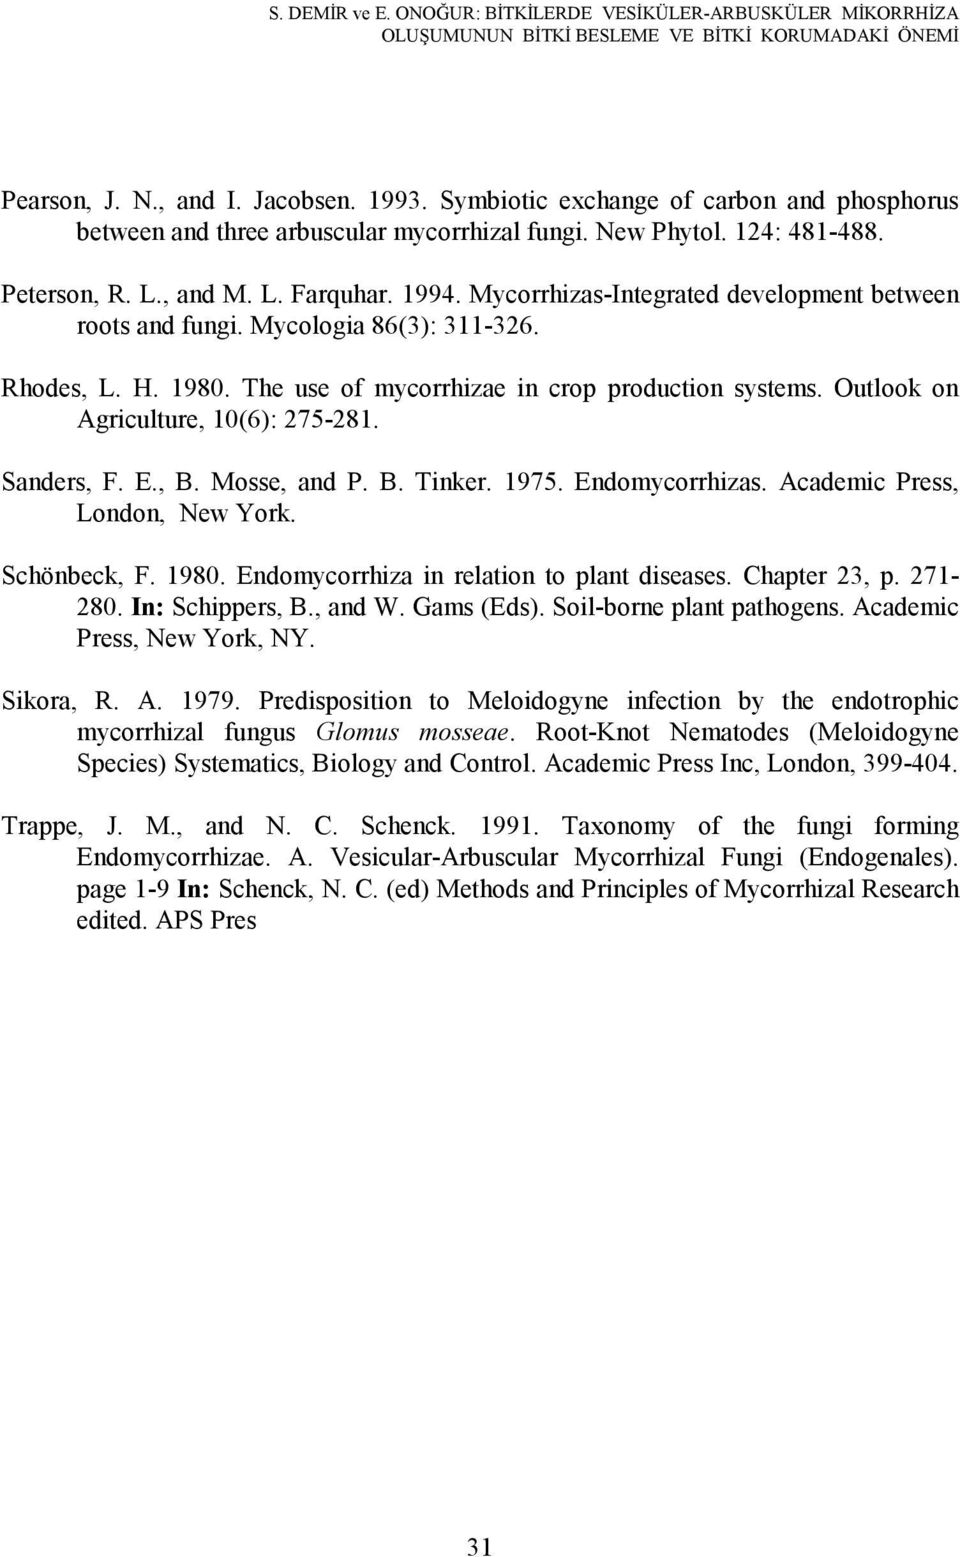 Mycorrhizas-Integrated development between roots and fungi. Mycologia 86(3): 311-326. Rhodes, L. H. 1980. The use of mycorrhizae in crop production systems. Outlook on Agriculture, 10(6): 275-281.